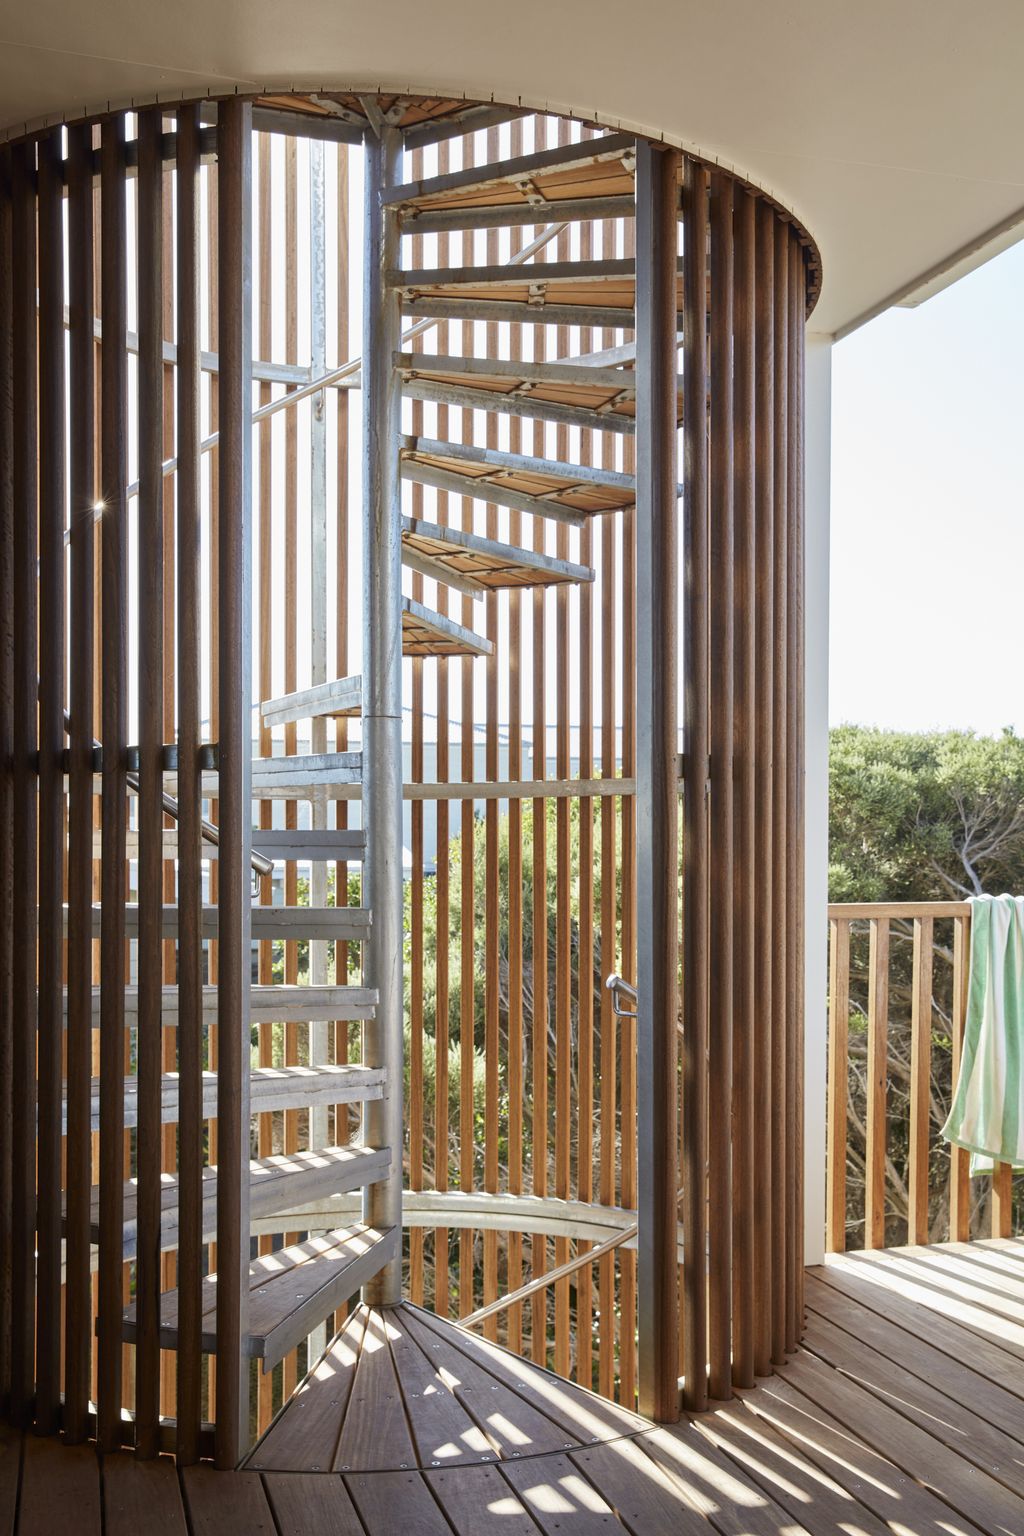 Moonah Tree House, a Prominent Coastal Home by Kirby Architects